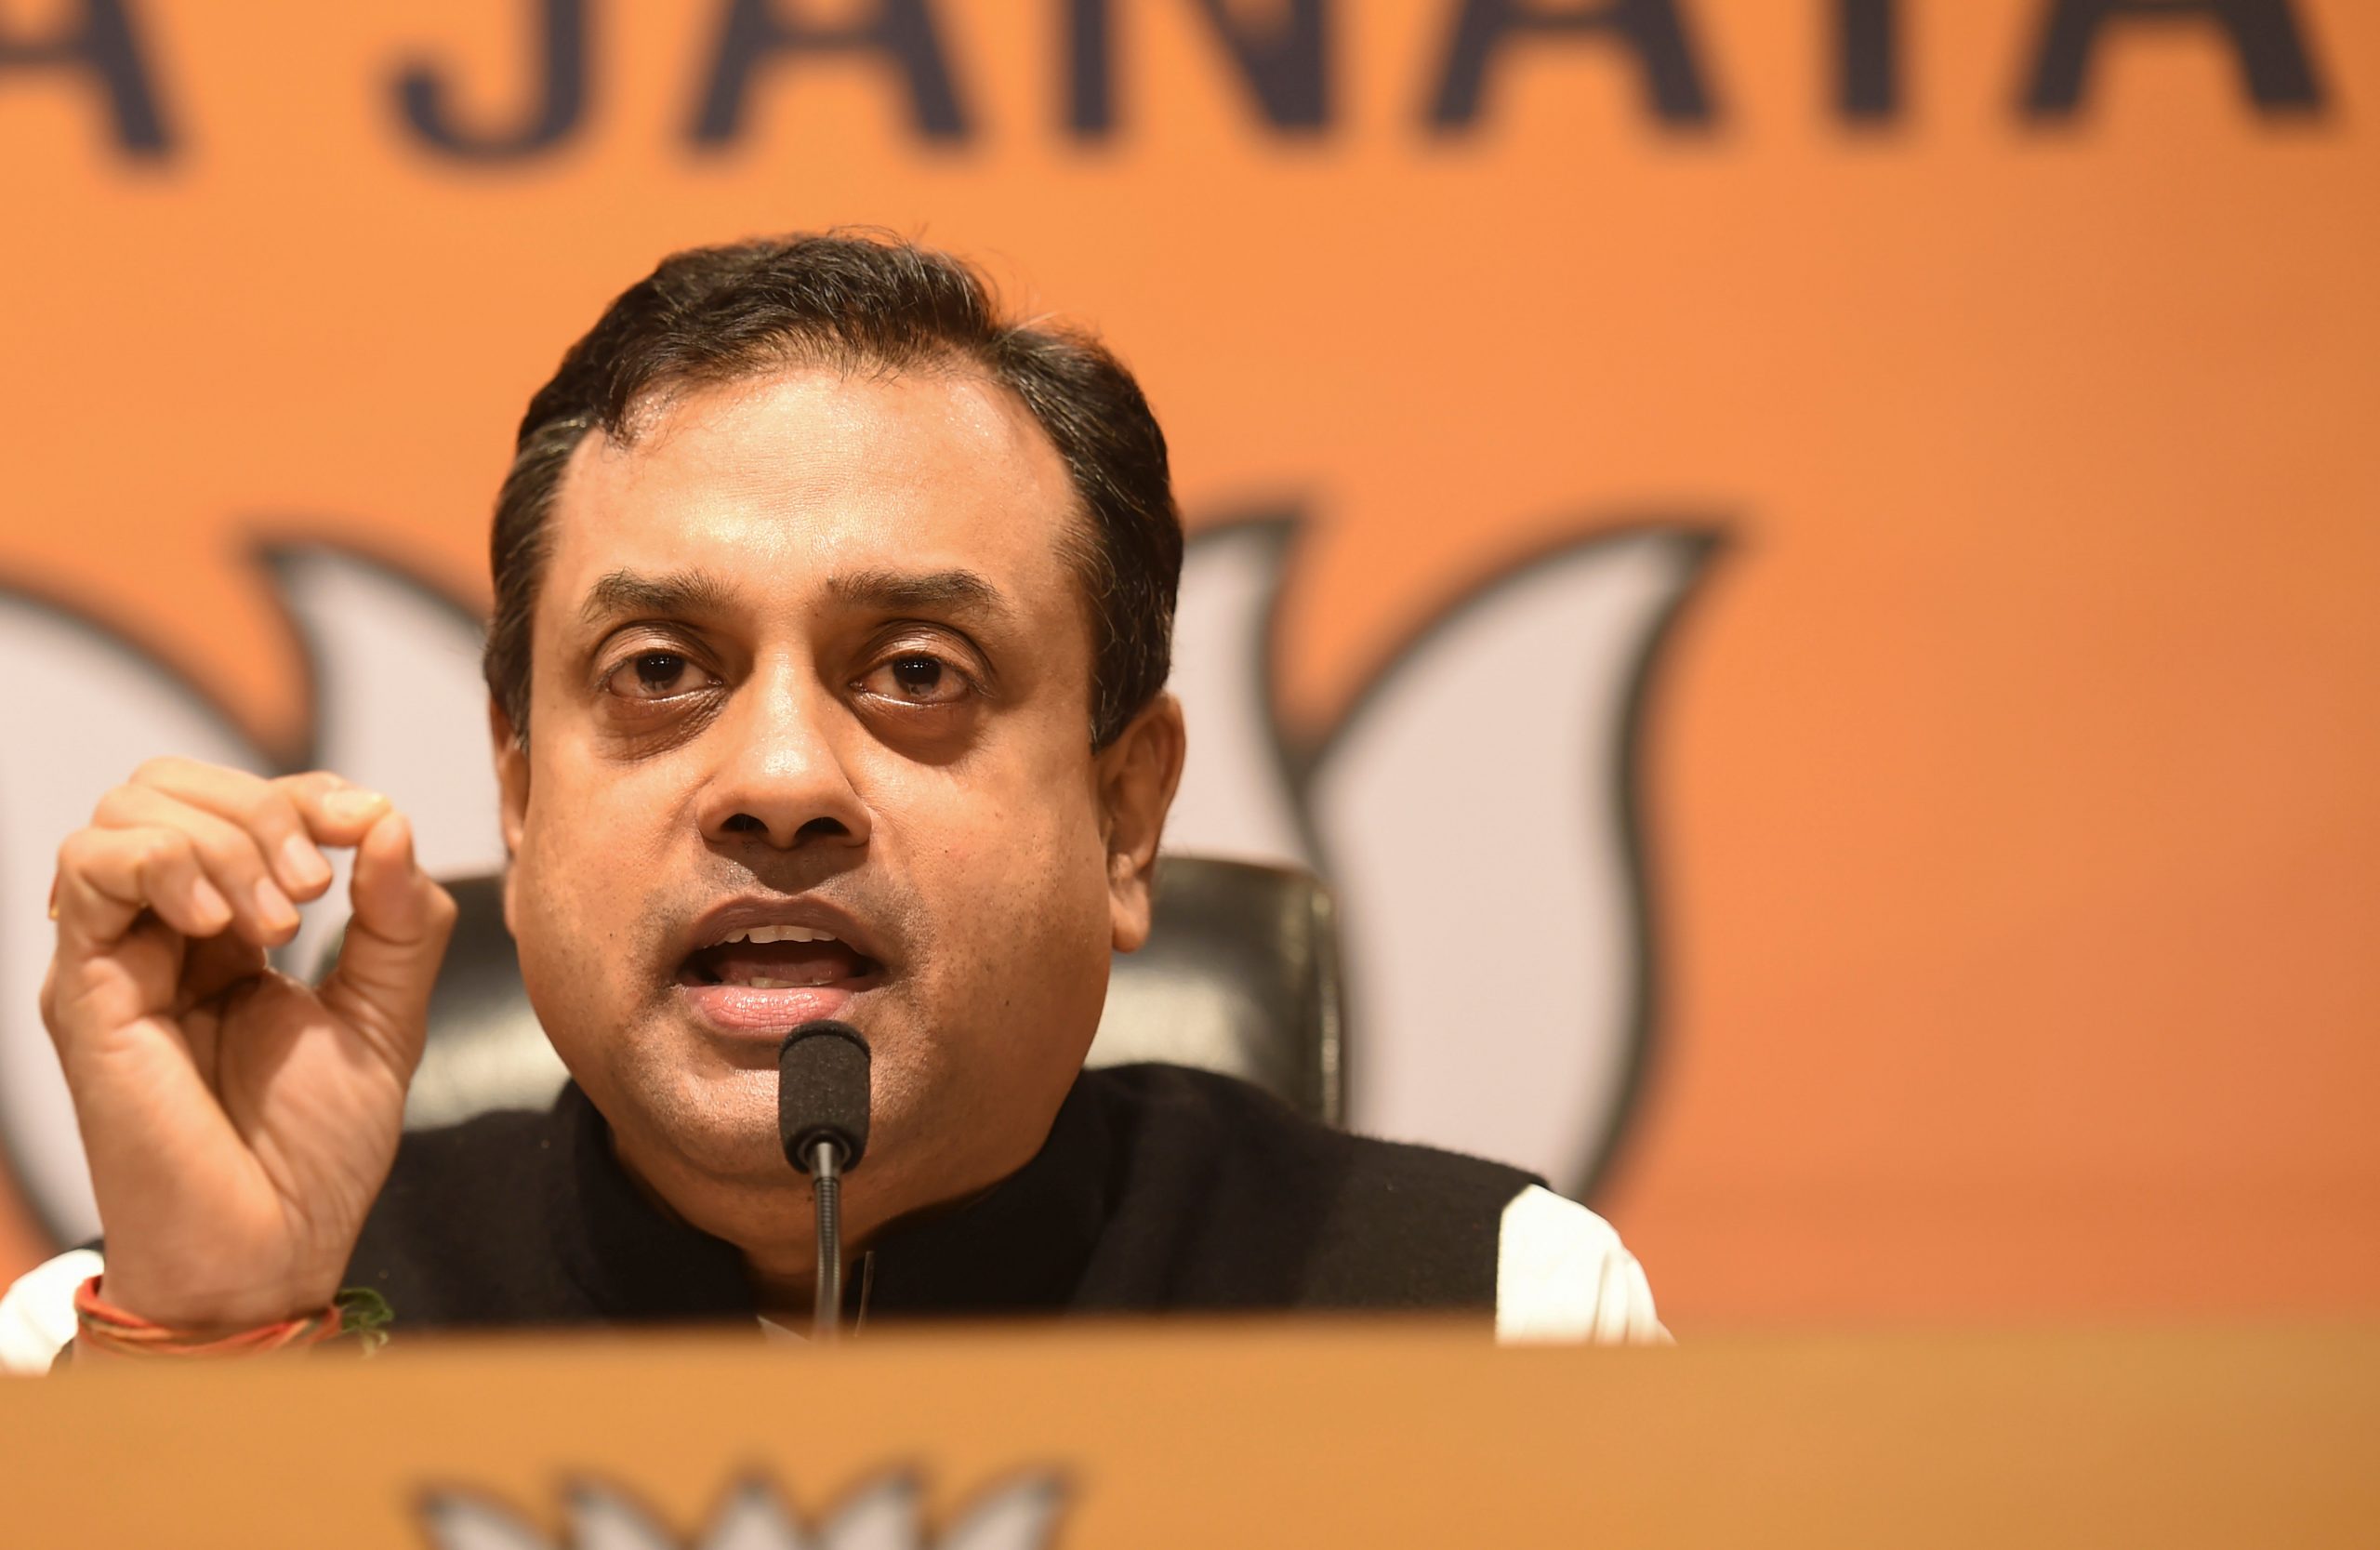 BJP spokesperson Sambit Patra calls farmers extremists after clashes during tractor rally